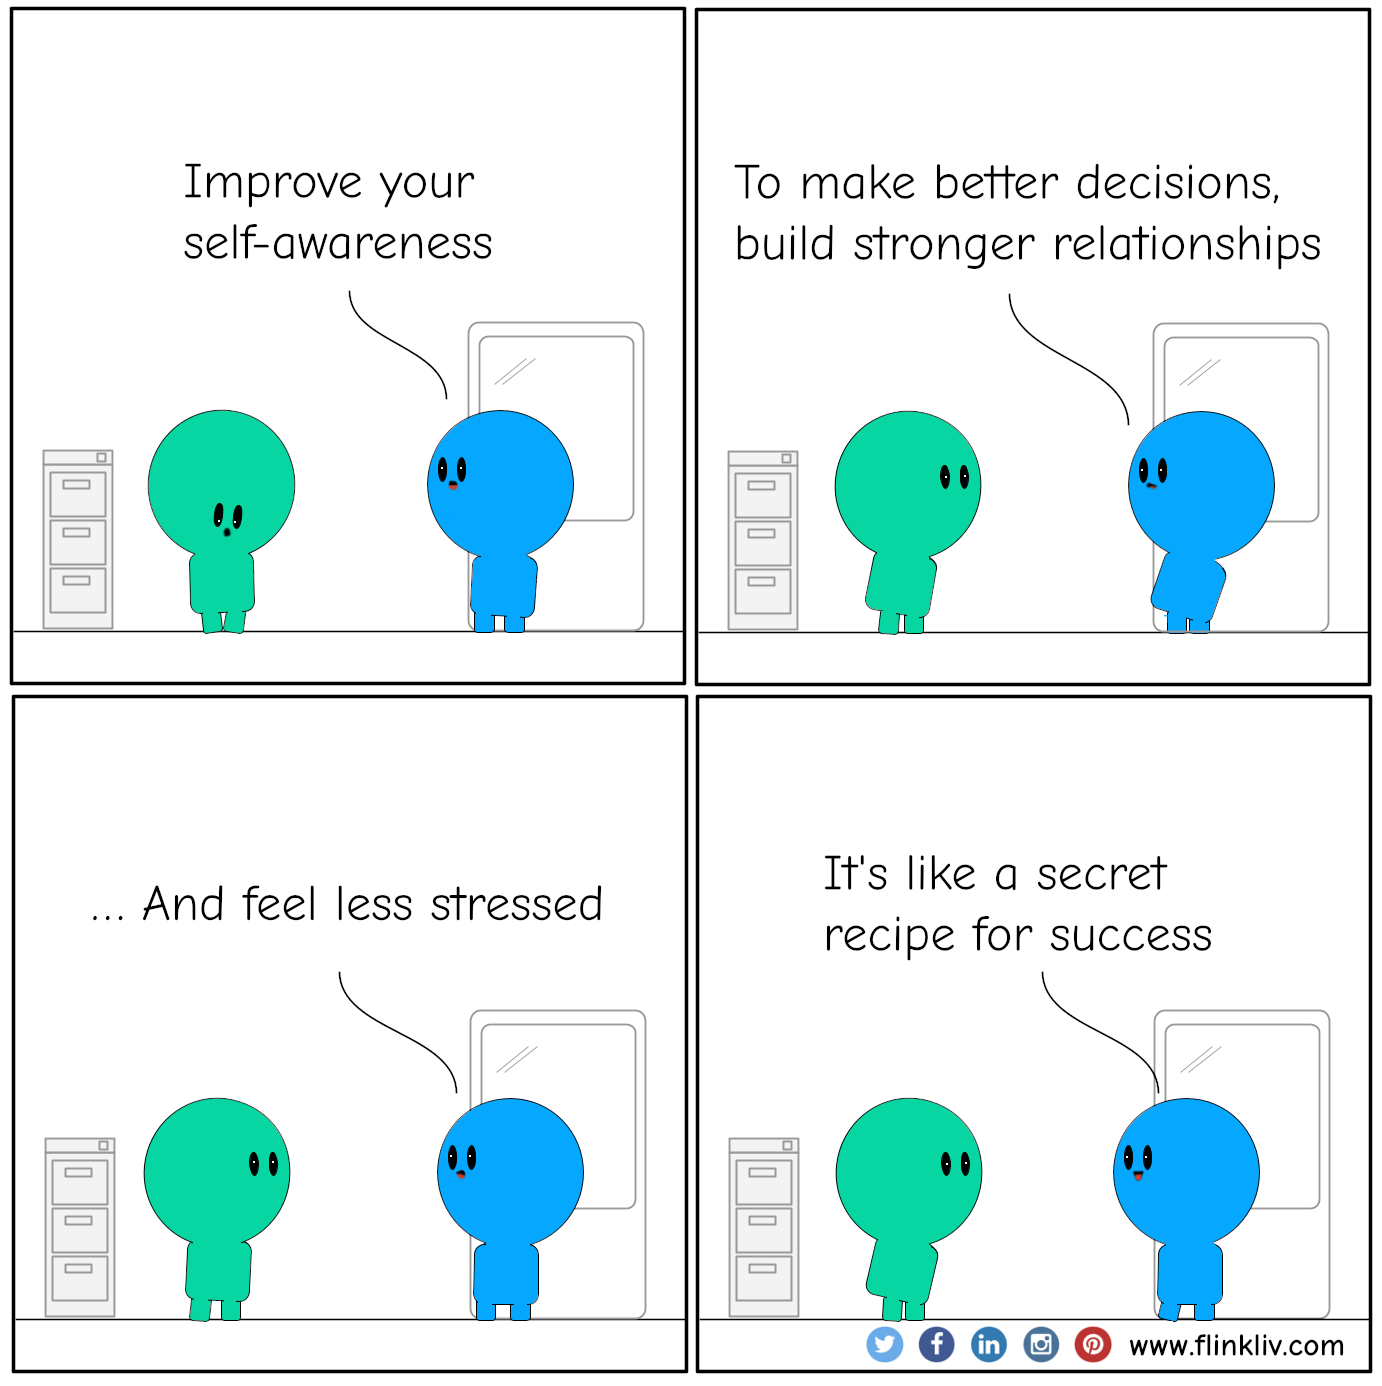 Conversation between A and B about the benefits of self-awarness.
				B: Improve your self-awareness.
				B: To make better decisions, build stronger relationships,
				B: and feel less stressed.
				B: It's like a secret recipe for success.
			